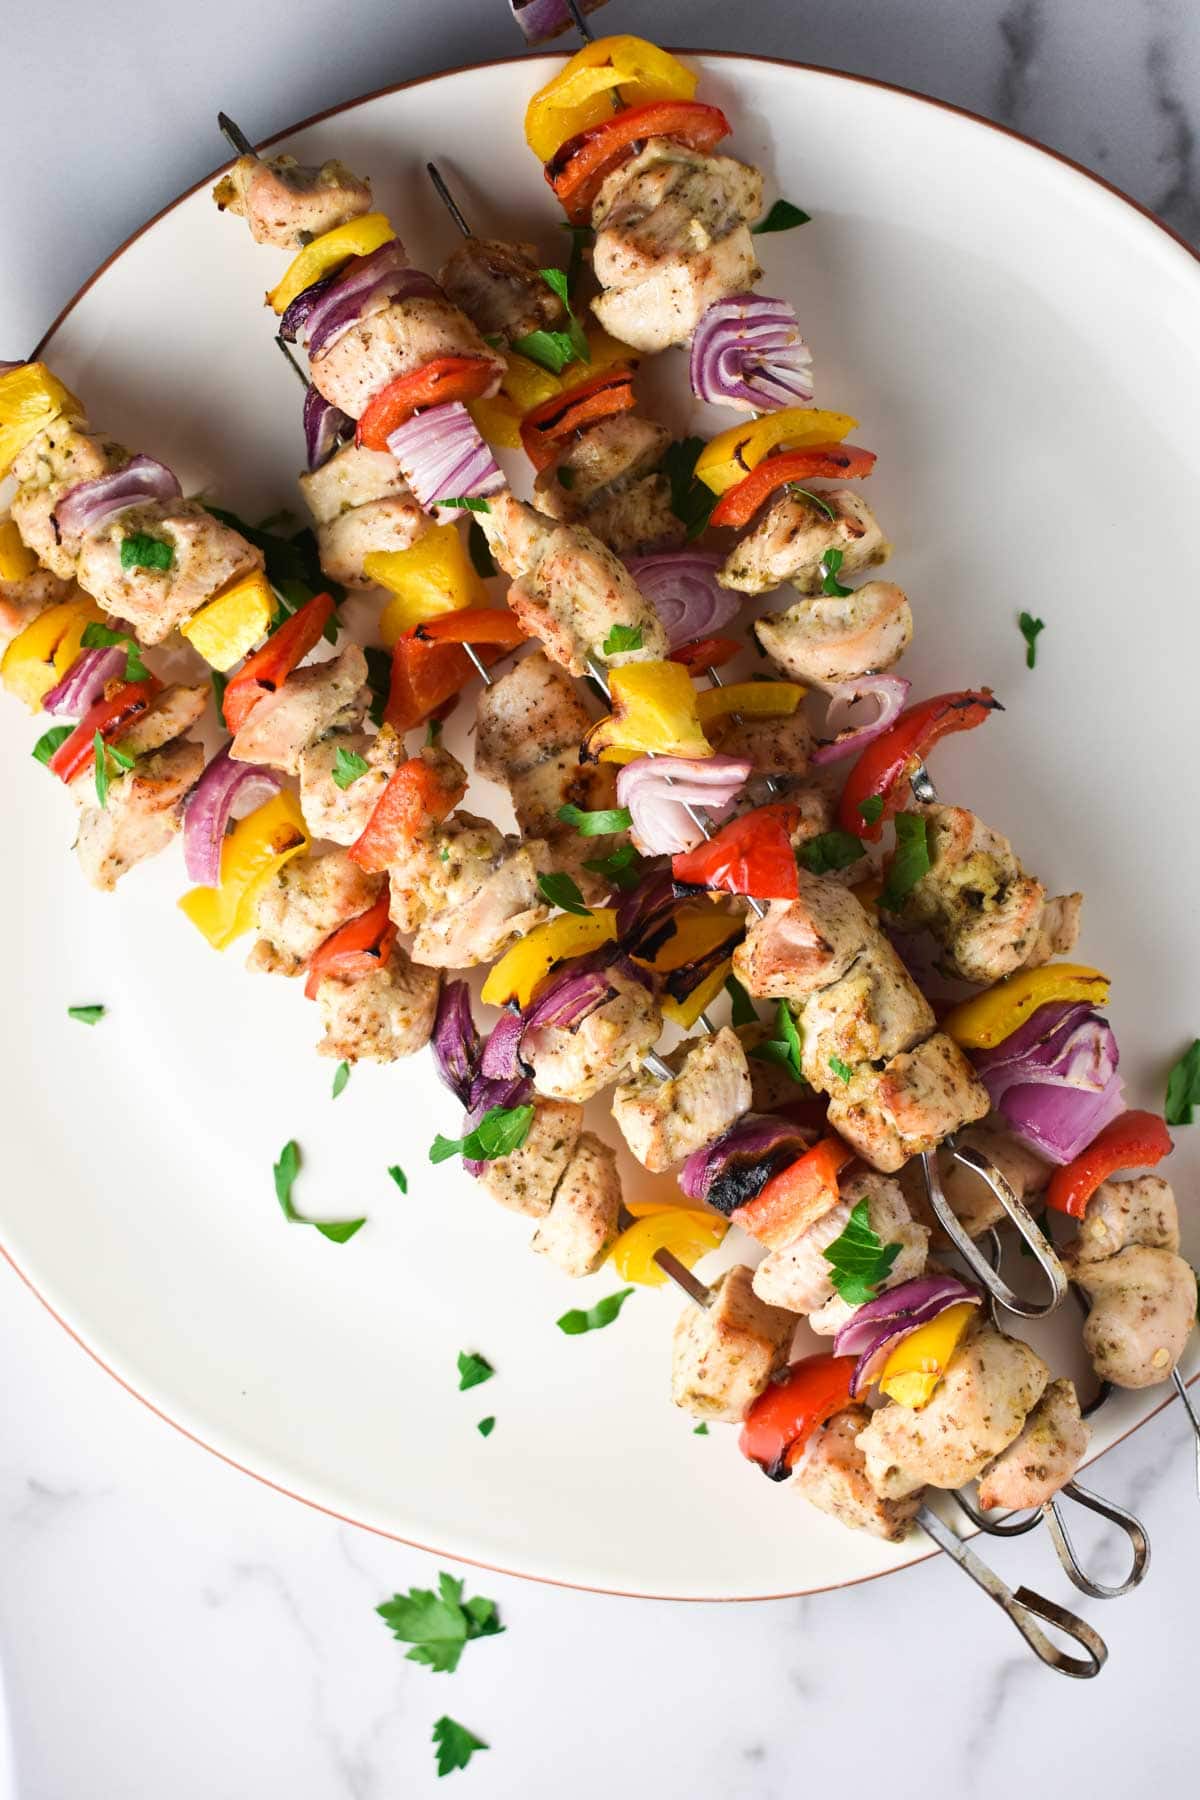 Chicken, peppers, shallots on a metal skewer.